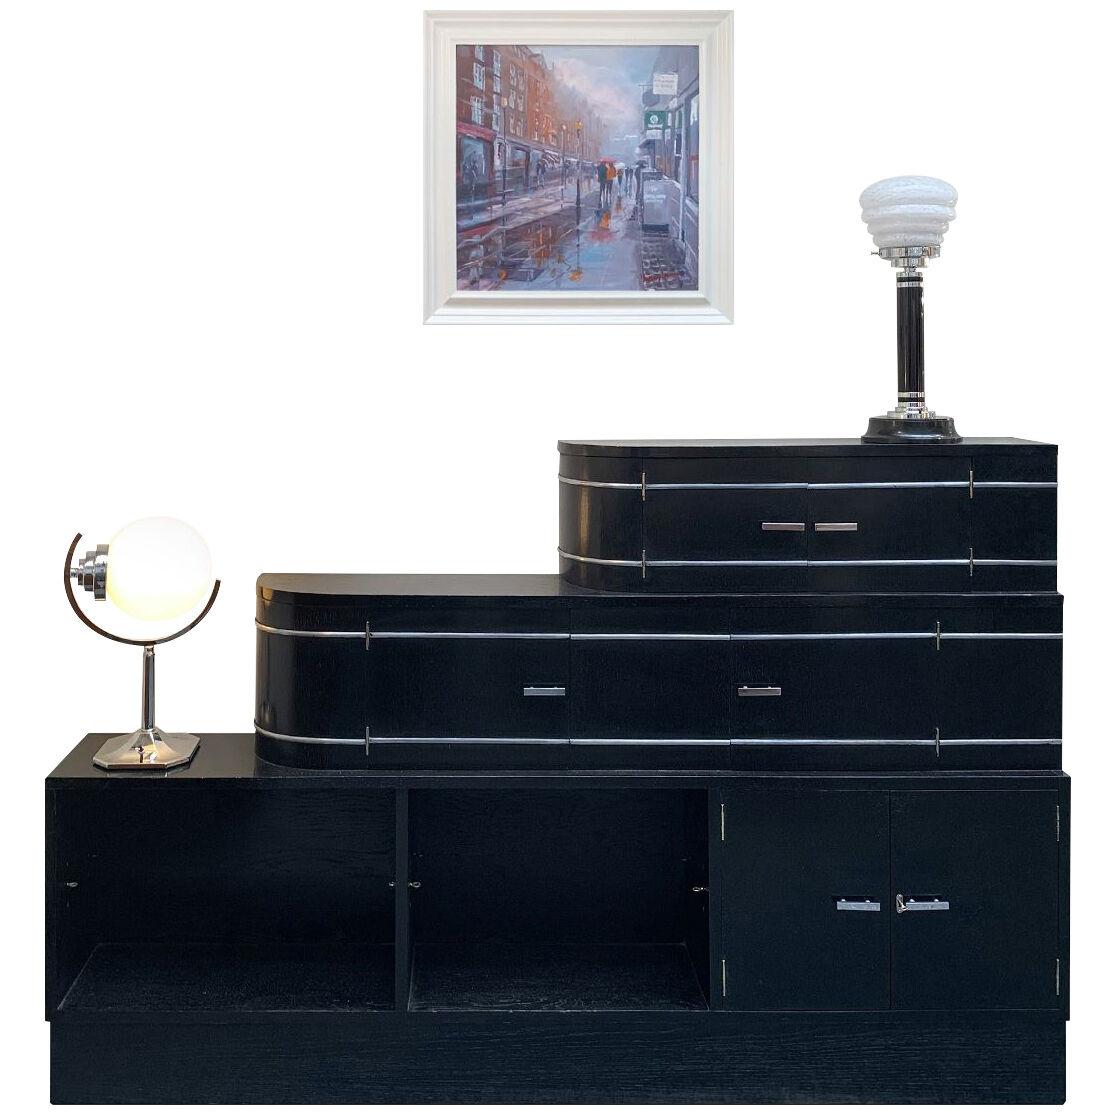 Bowman Brothers Art Deco Bookcase Cabinet in black polished oak